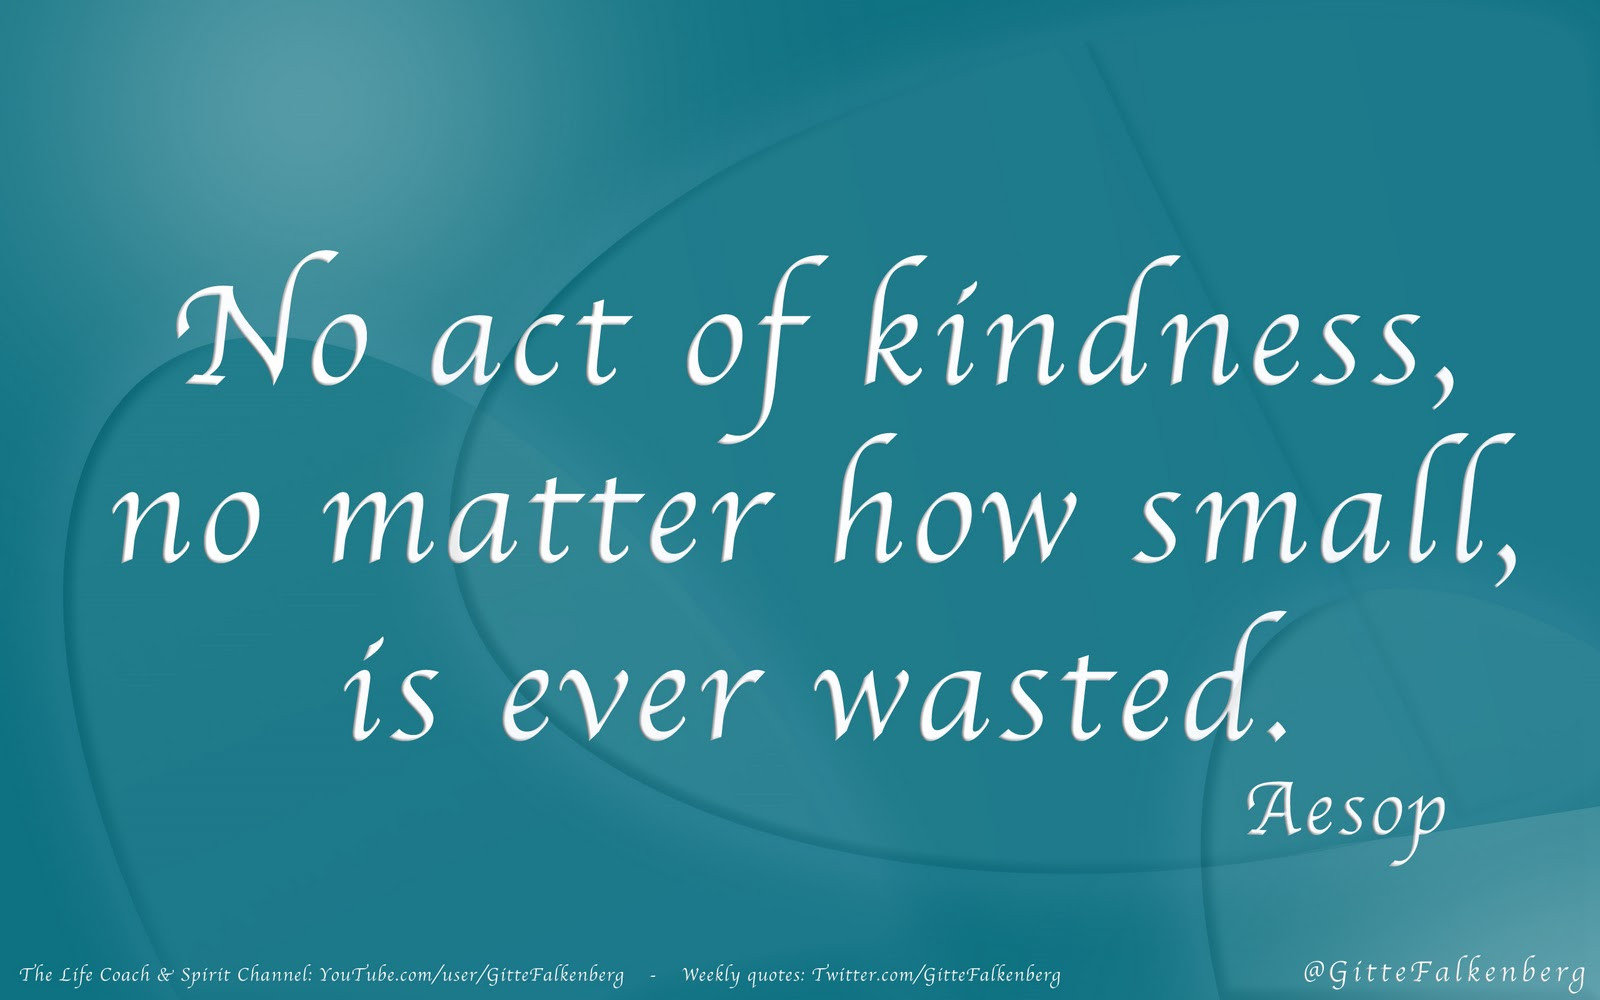 Quote About Random Acts Of Kindness
 The Heart of Innovation The Kindness At Work Manifesto